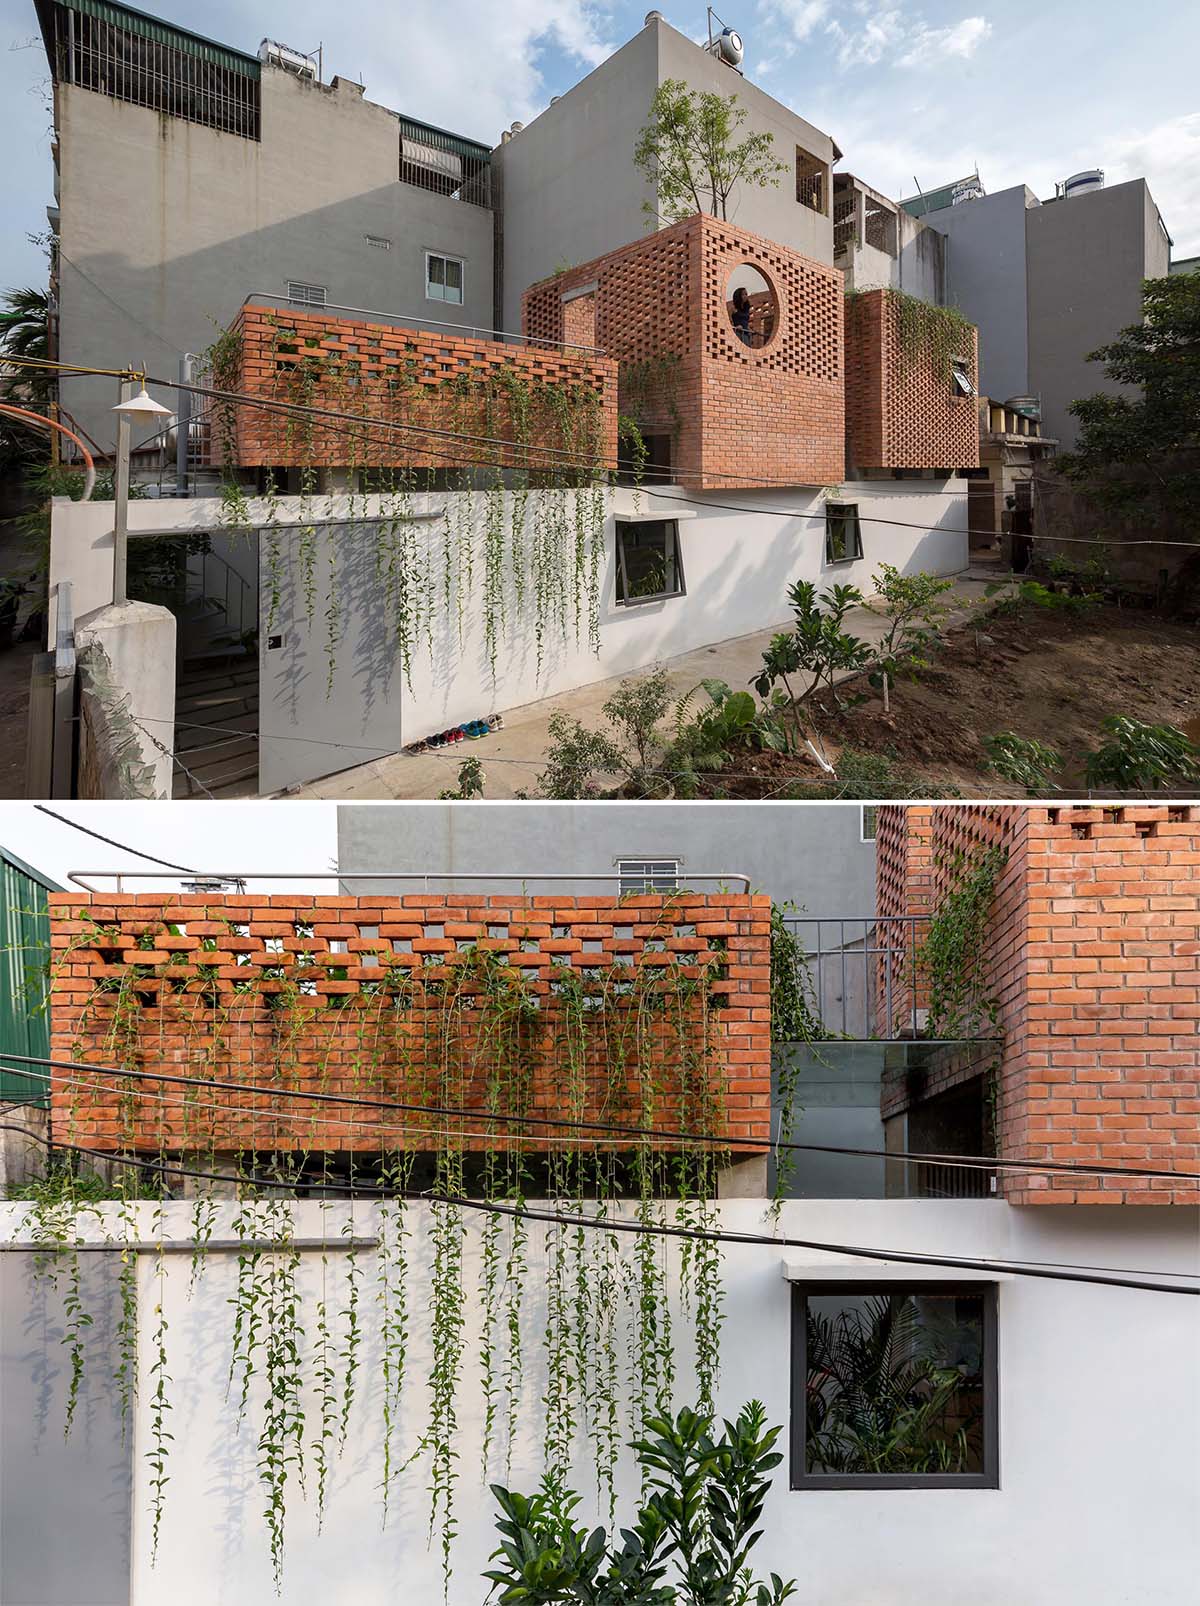 A contemporary home with rooftop courtyards surrounded by brick.